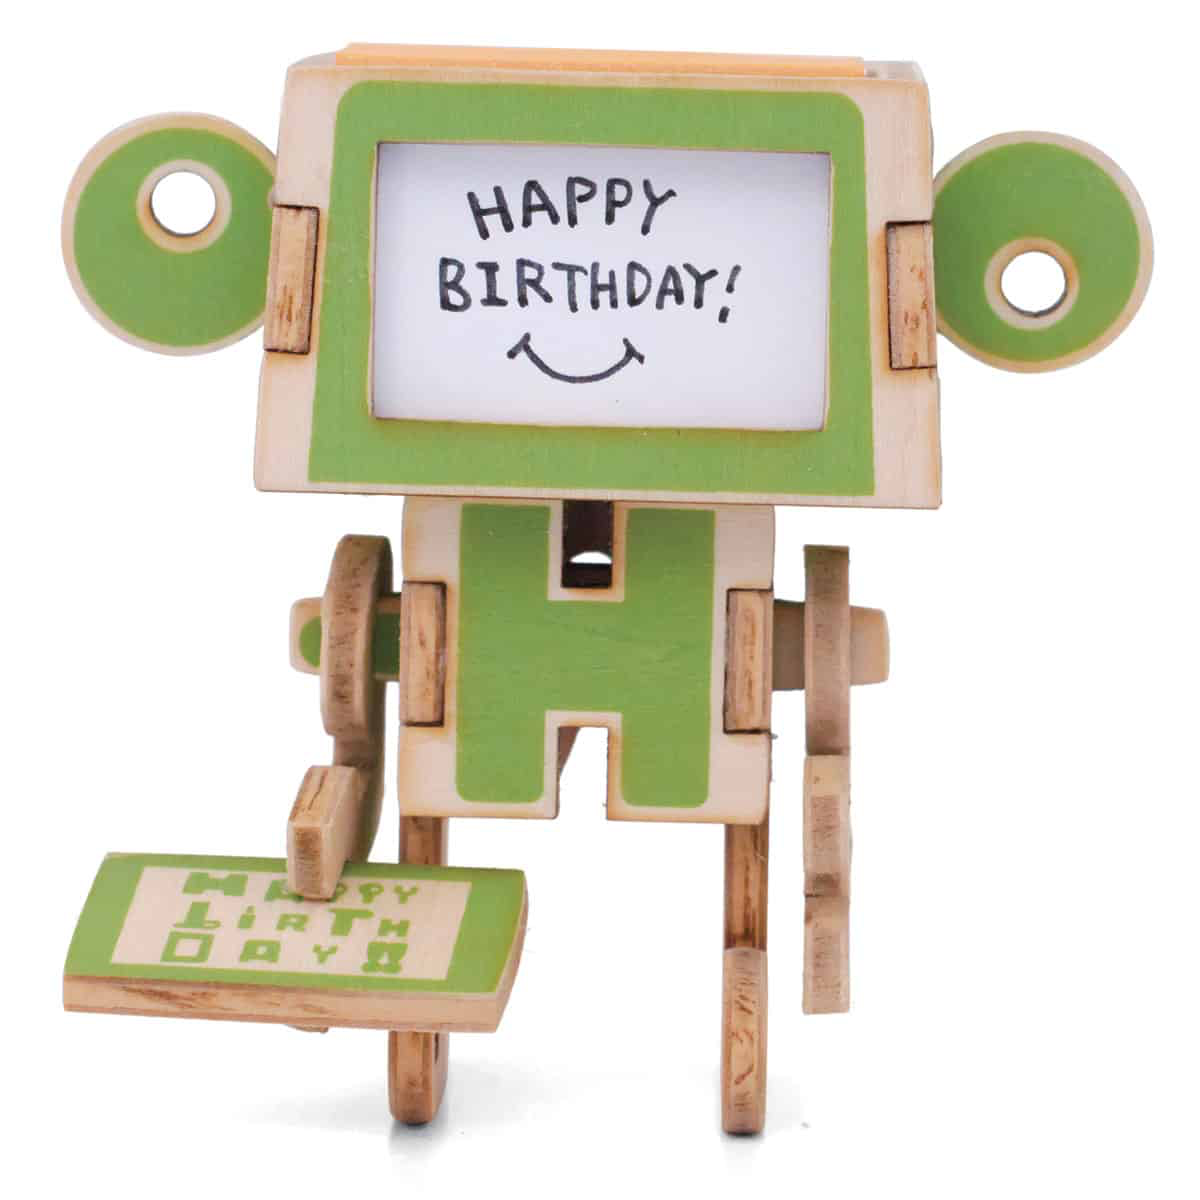 Back image from “PLAY-DECO Wooden Greeting Card” reading Happy Birthday.